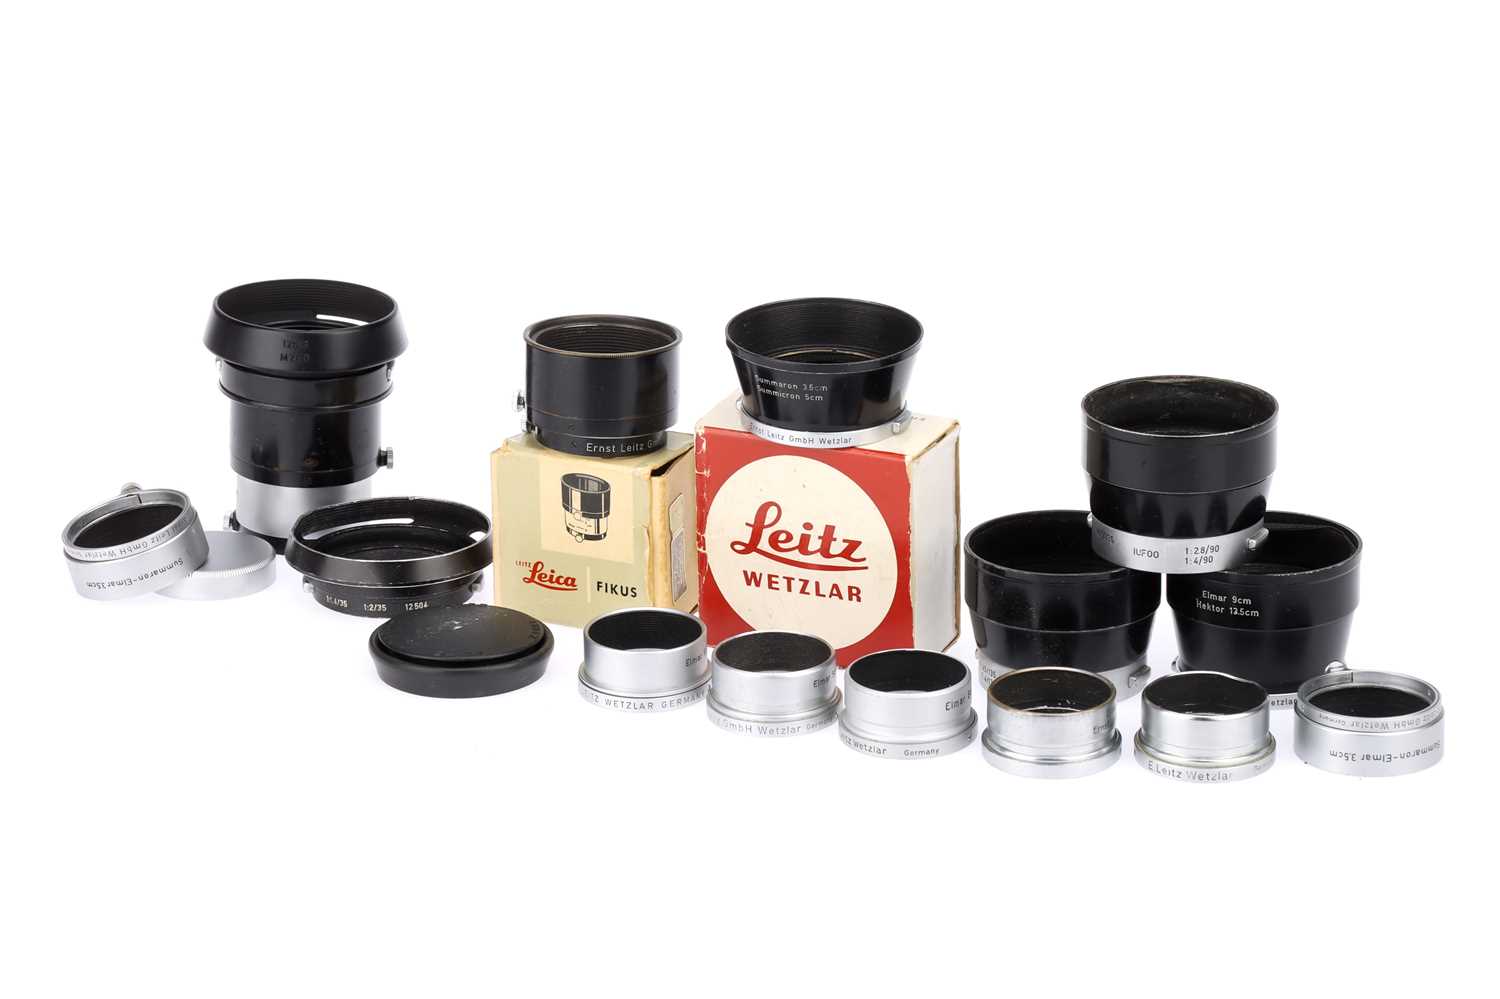 Lot 46 - A Selection of Leica Lens Hoods